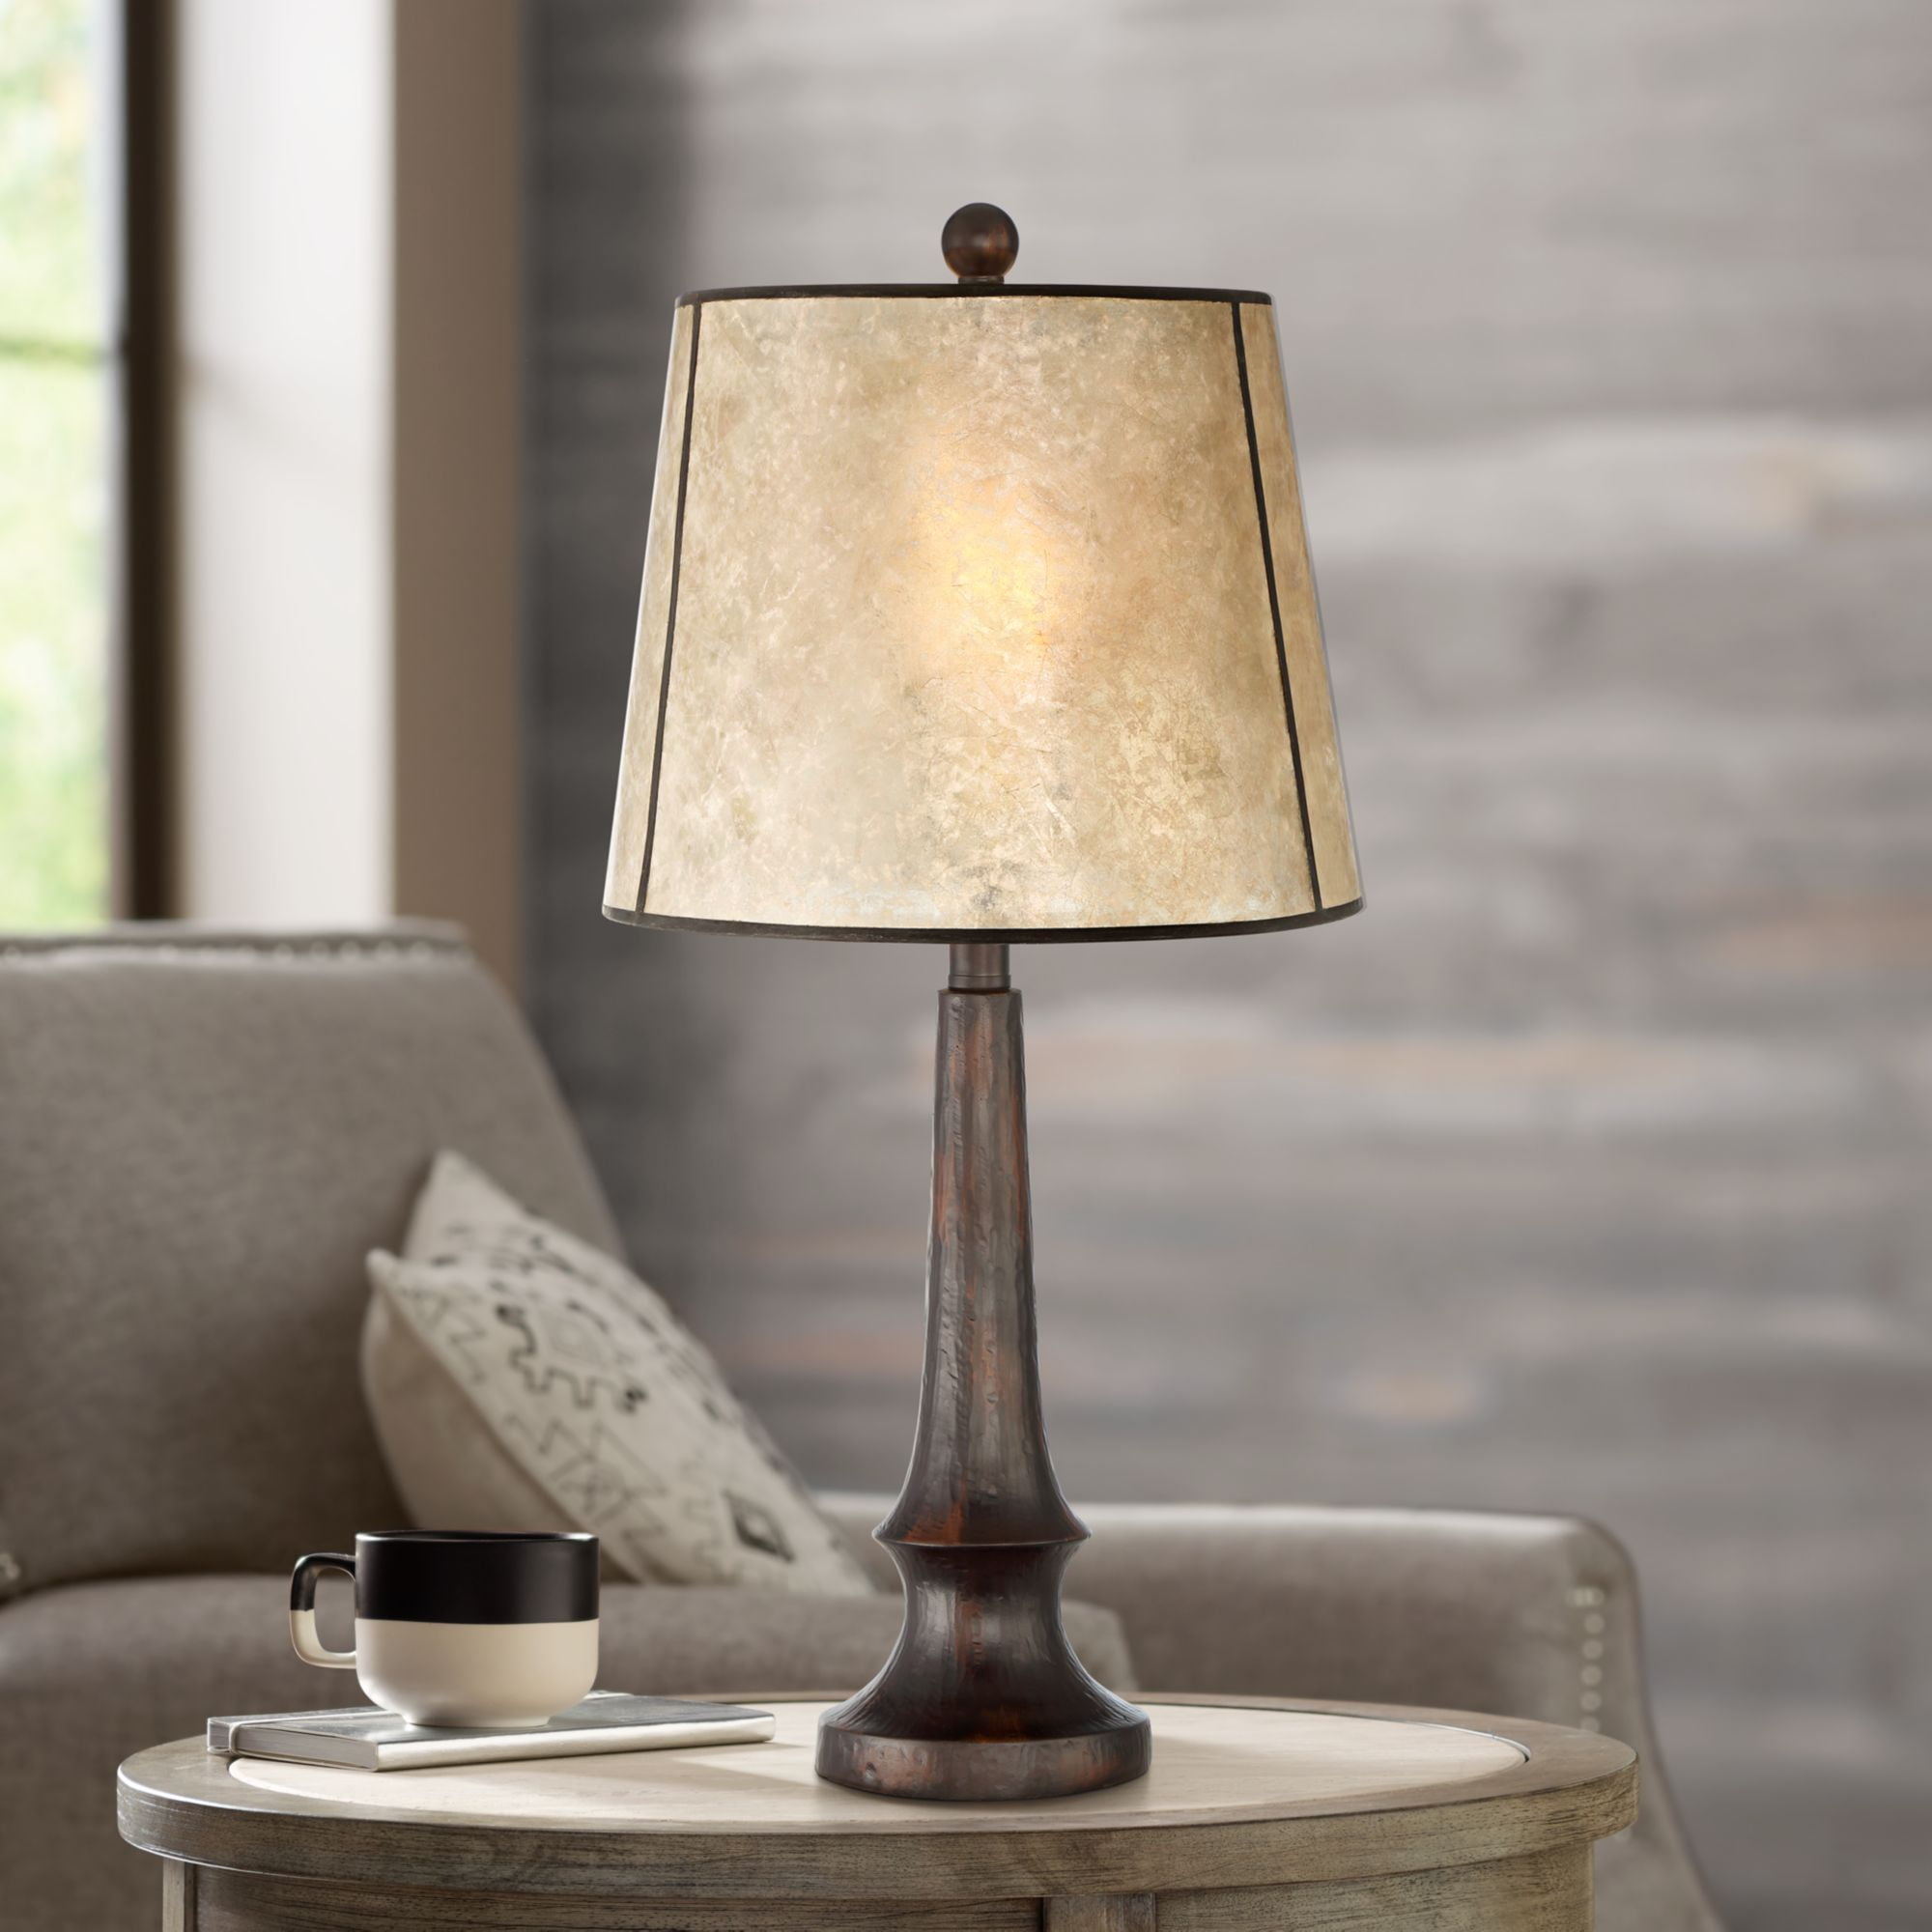 Franklin Iron Works Rustic Table Lamp 